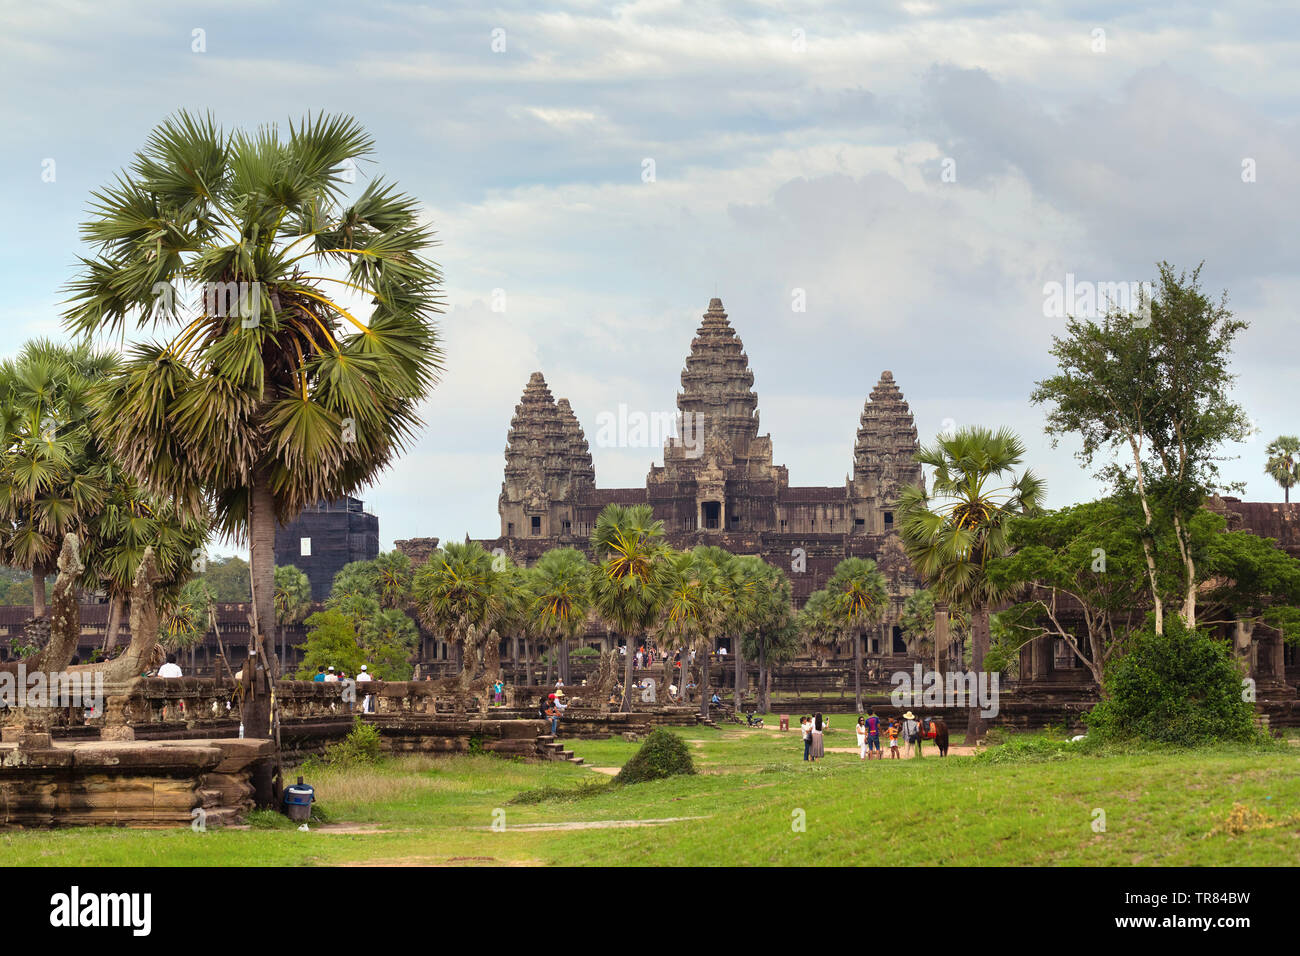 Angkor Wat temple, Angkor Wat, UNESCO World Heritage Site, Siem Reap Province, Cambodia, Indochina, Southeast Asia, Asia Stock Photo